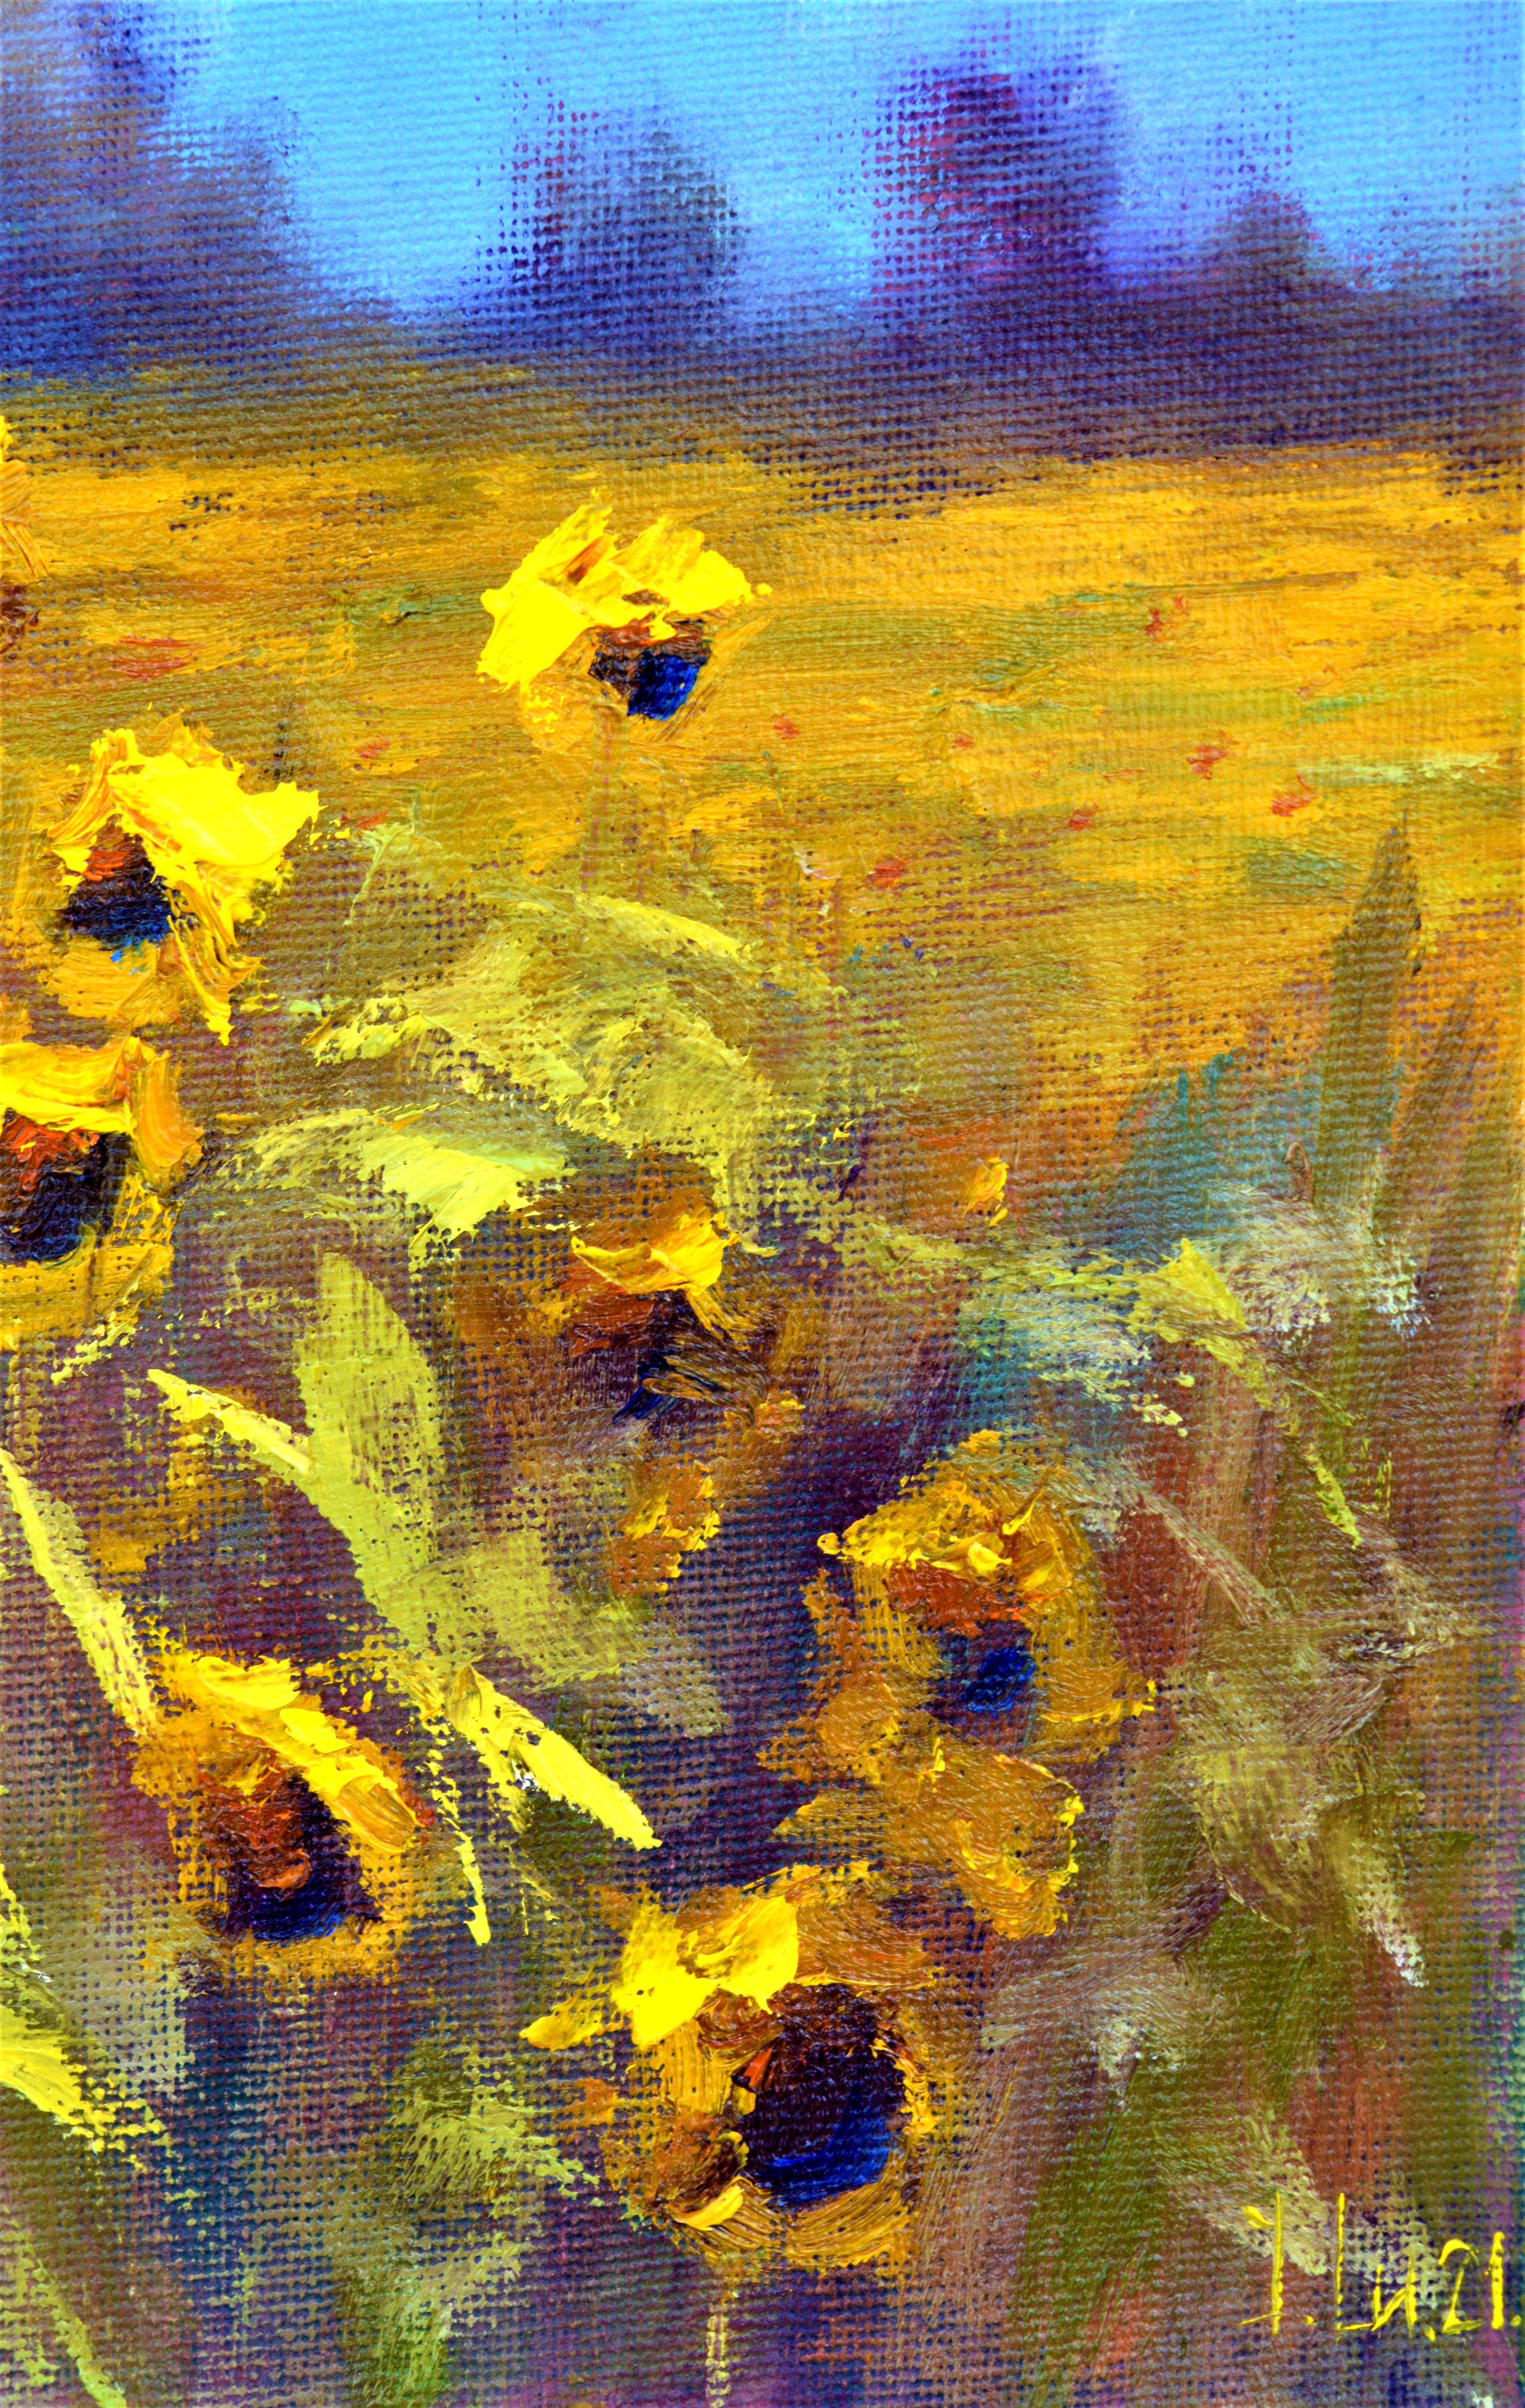 Sunny flowers 3D (24X18) - Painting by Elena Lukina